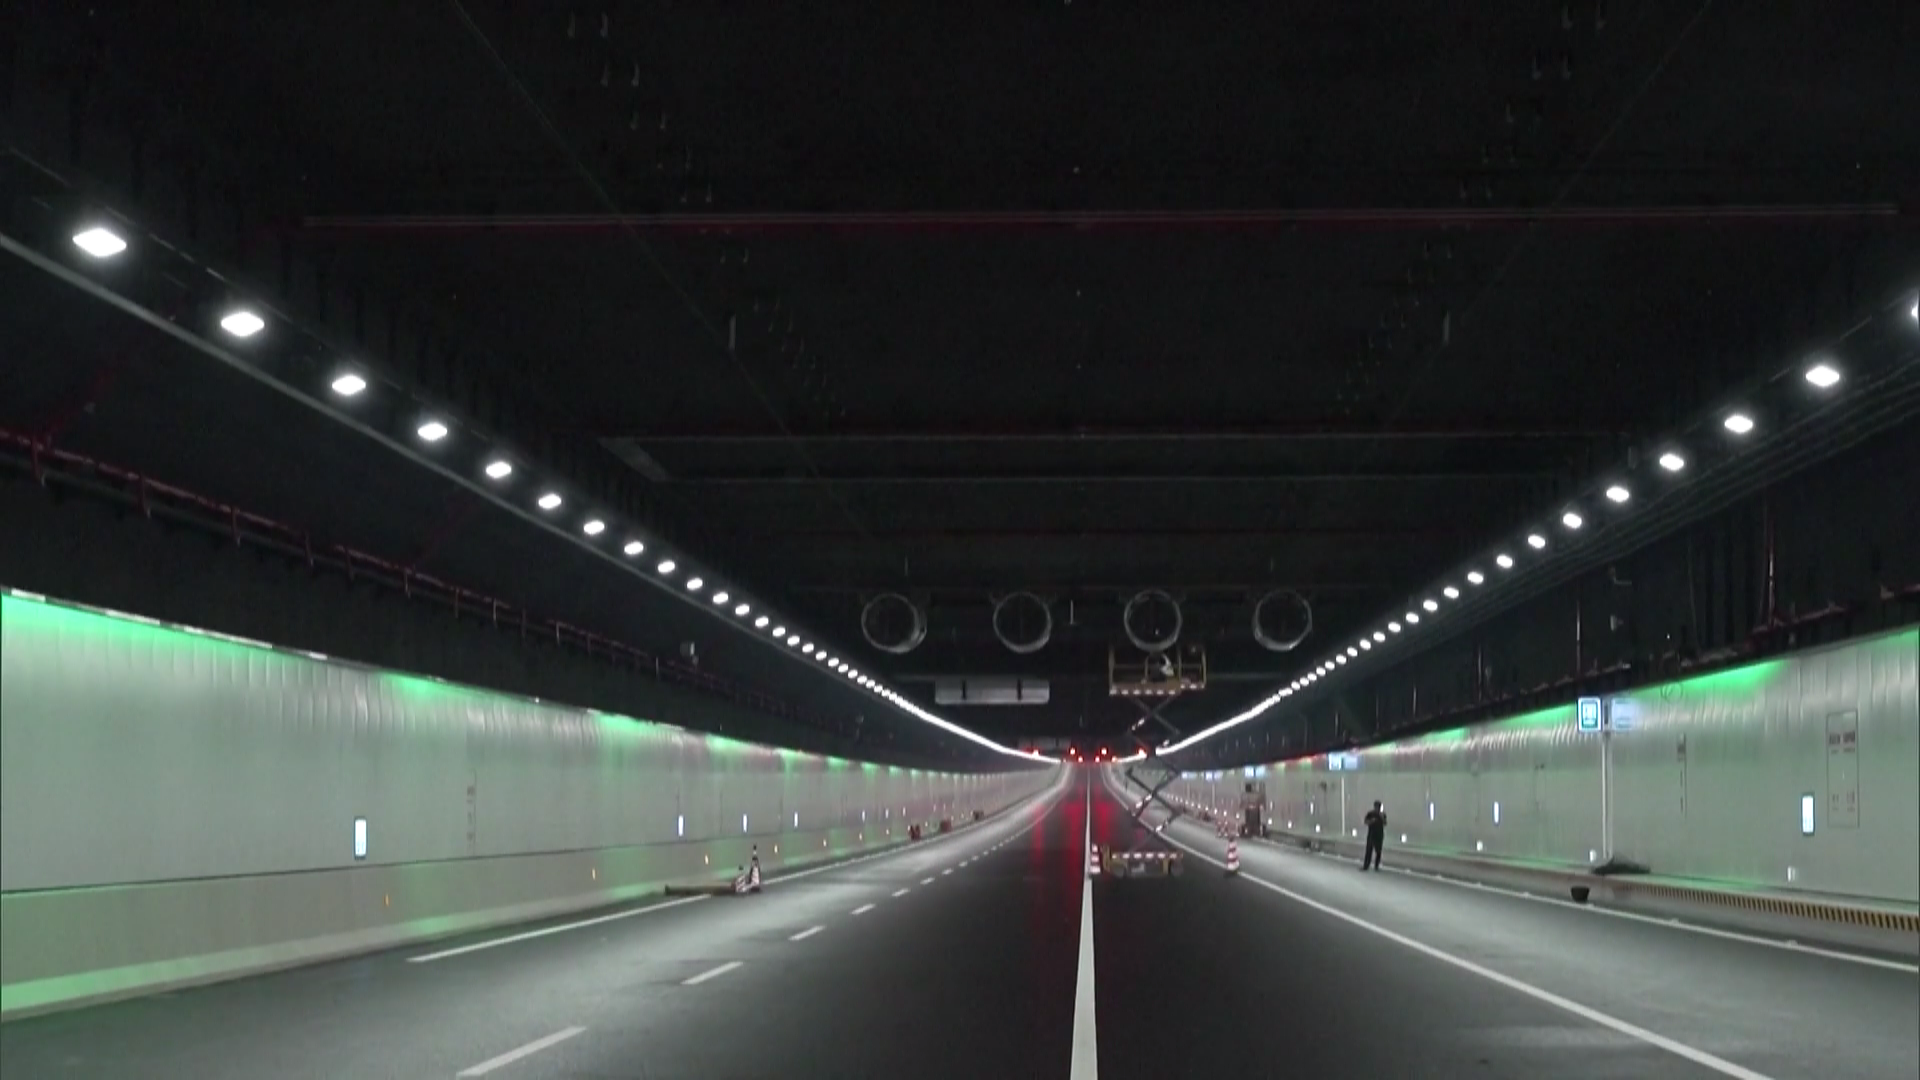 The undersea tunnel of the Shenzhen-Zhongshan Link in south China's Guangdong Province. /CFP